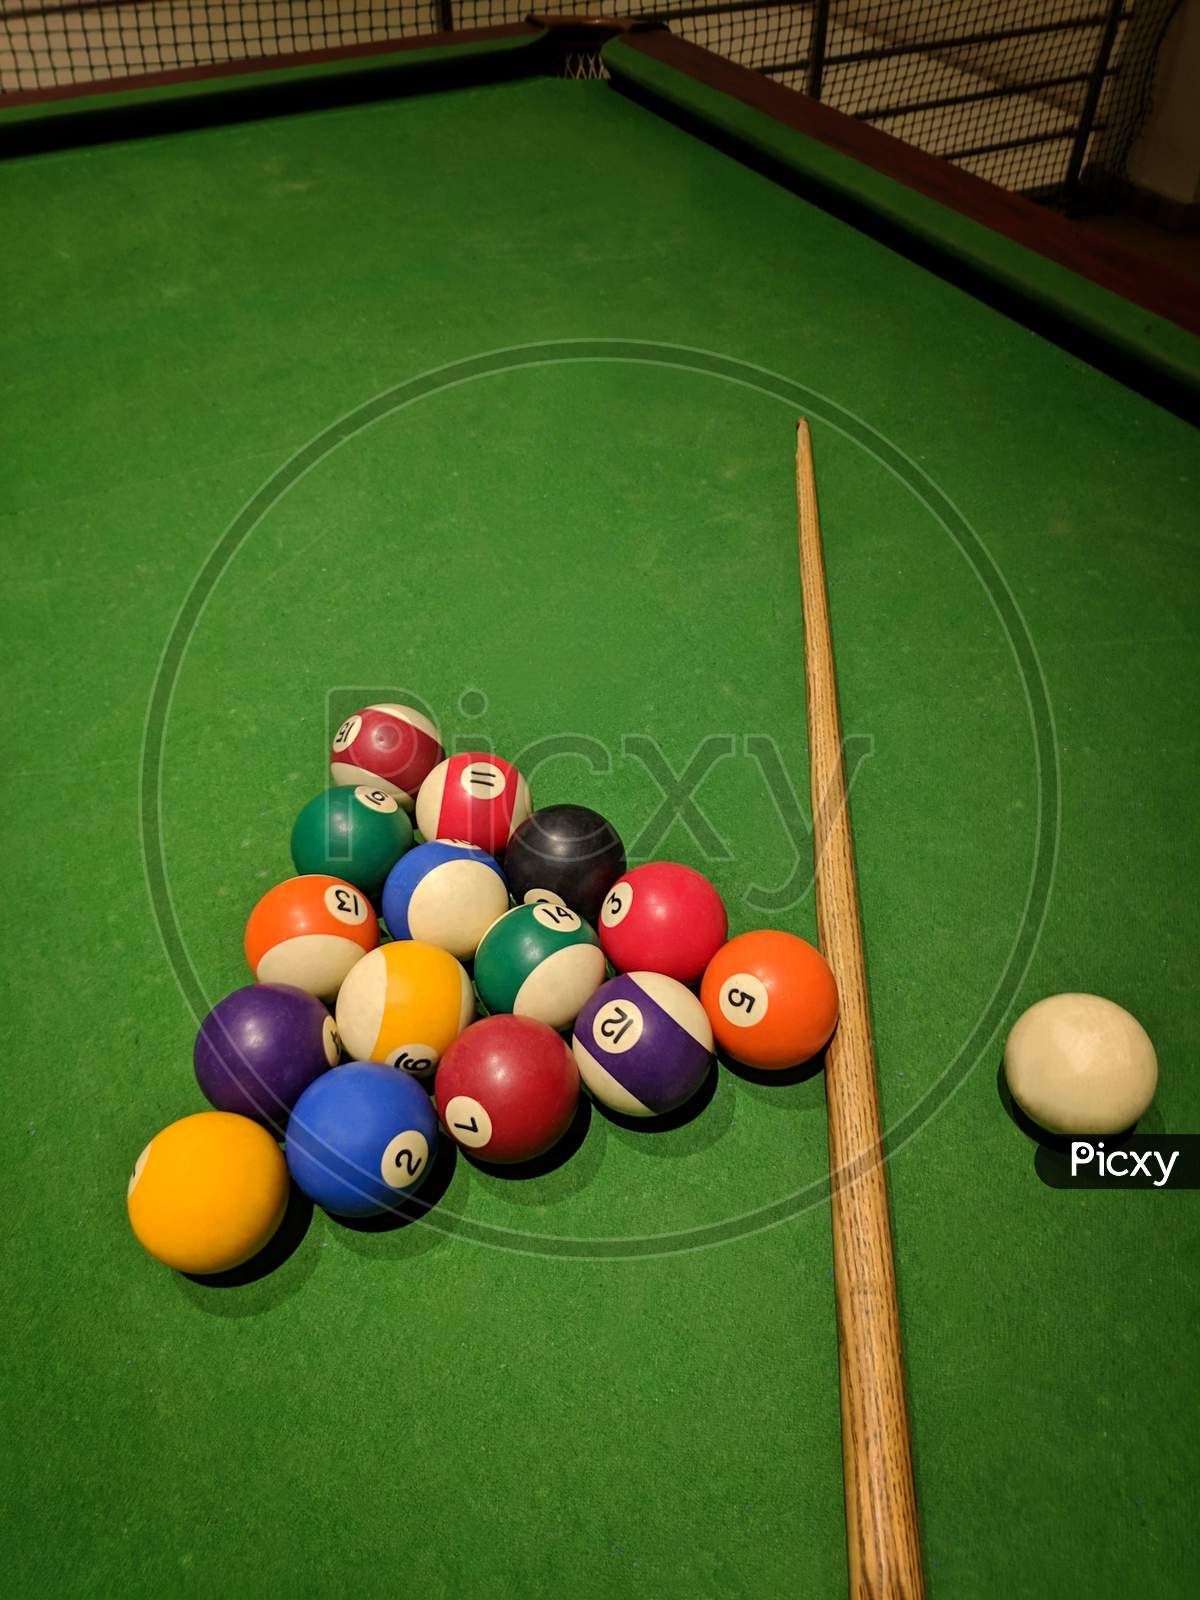 Billiard Balls And Cue Stick On Green Table. Pool Game, Colored Balls For Playing Snooker On A Green Cloth Of A Billiard Table,India.